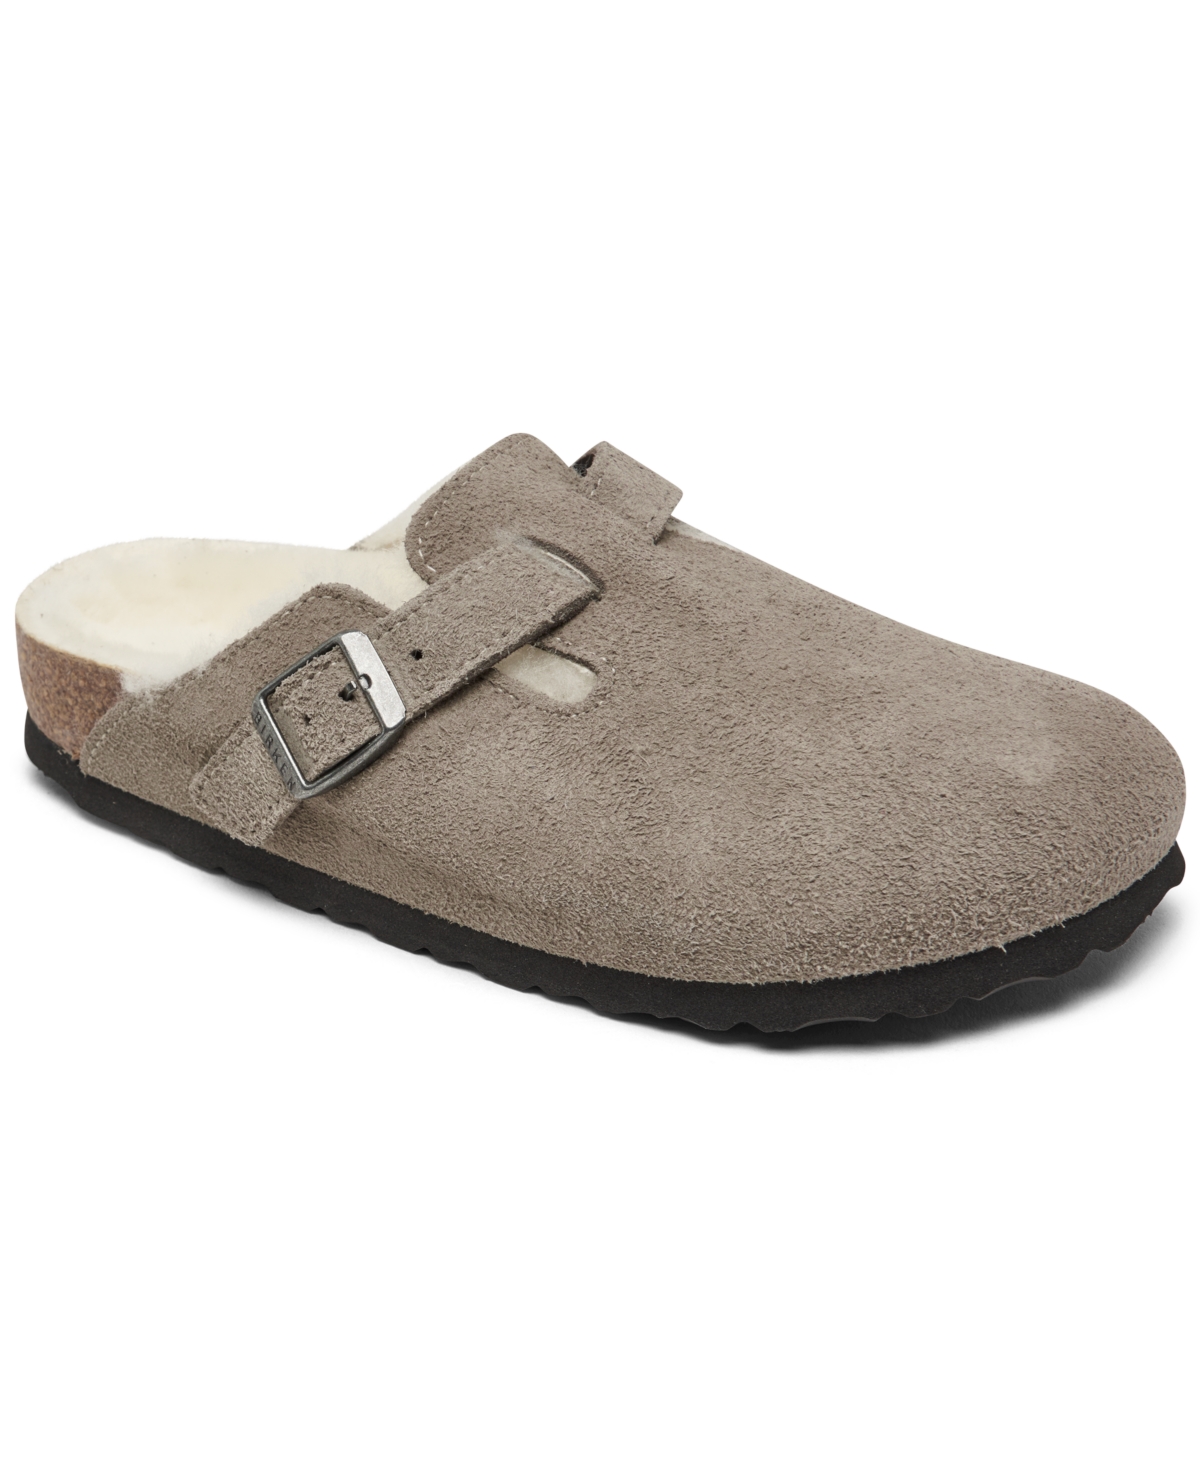 Birkenstock Women's Boston Shearling Suede Leather Clogs from Finish Line - Stone Coin